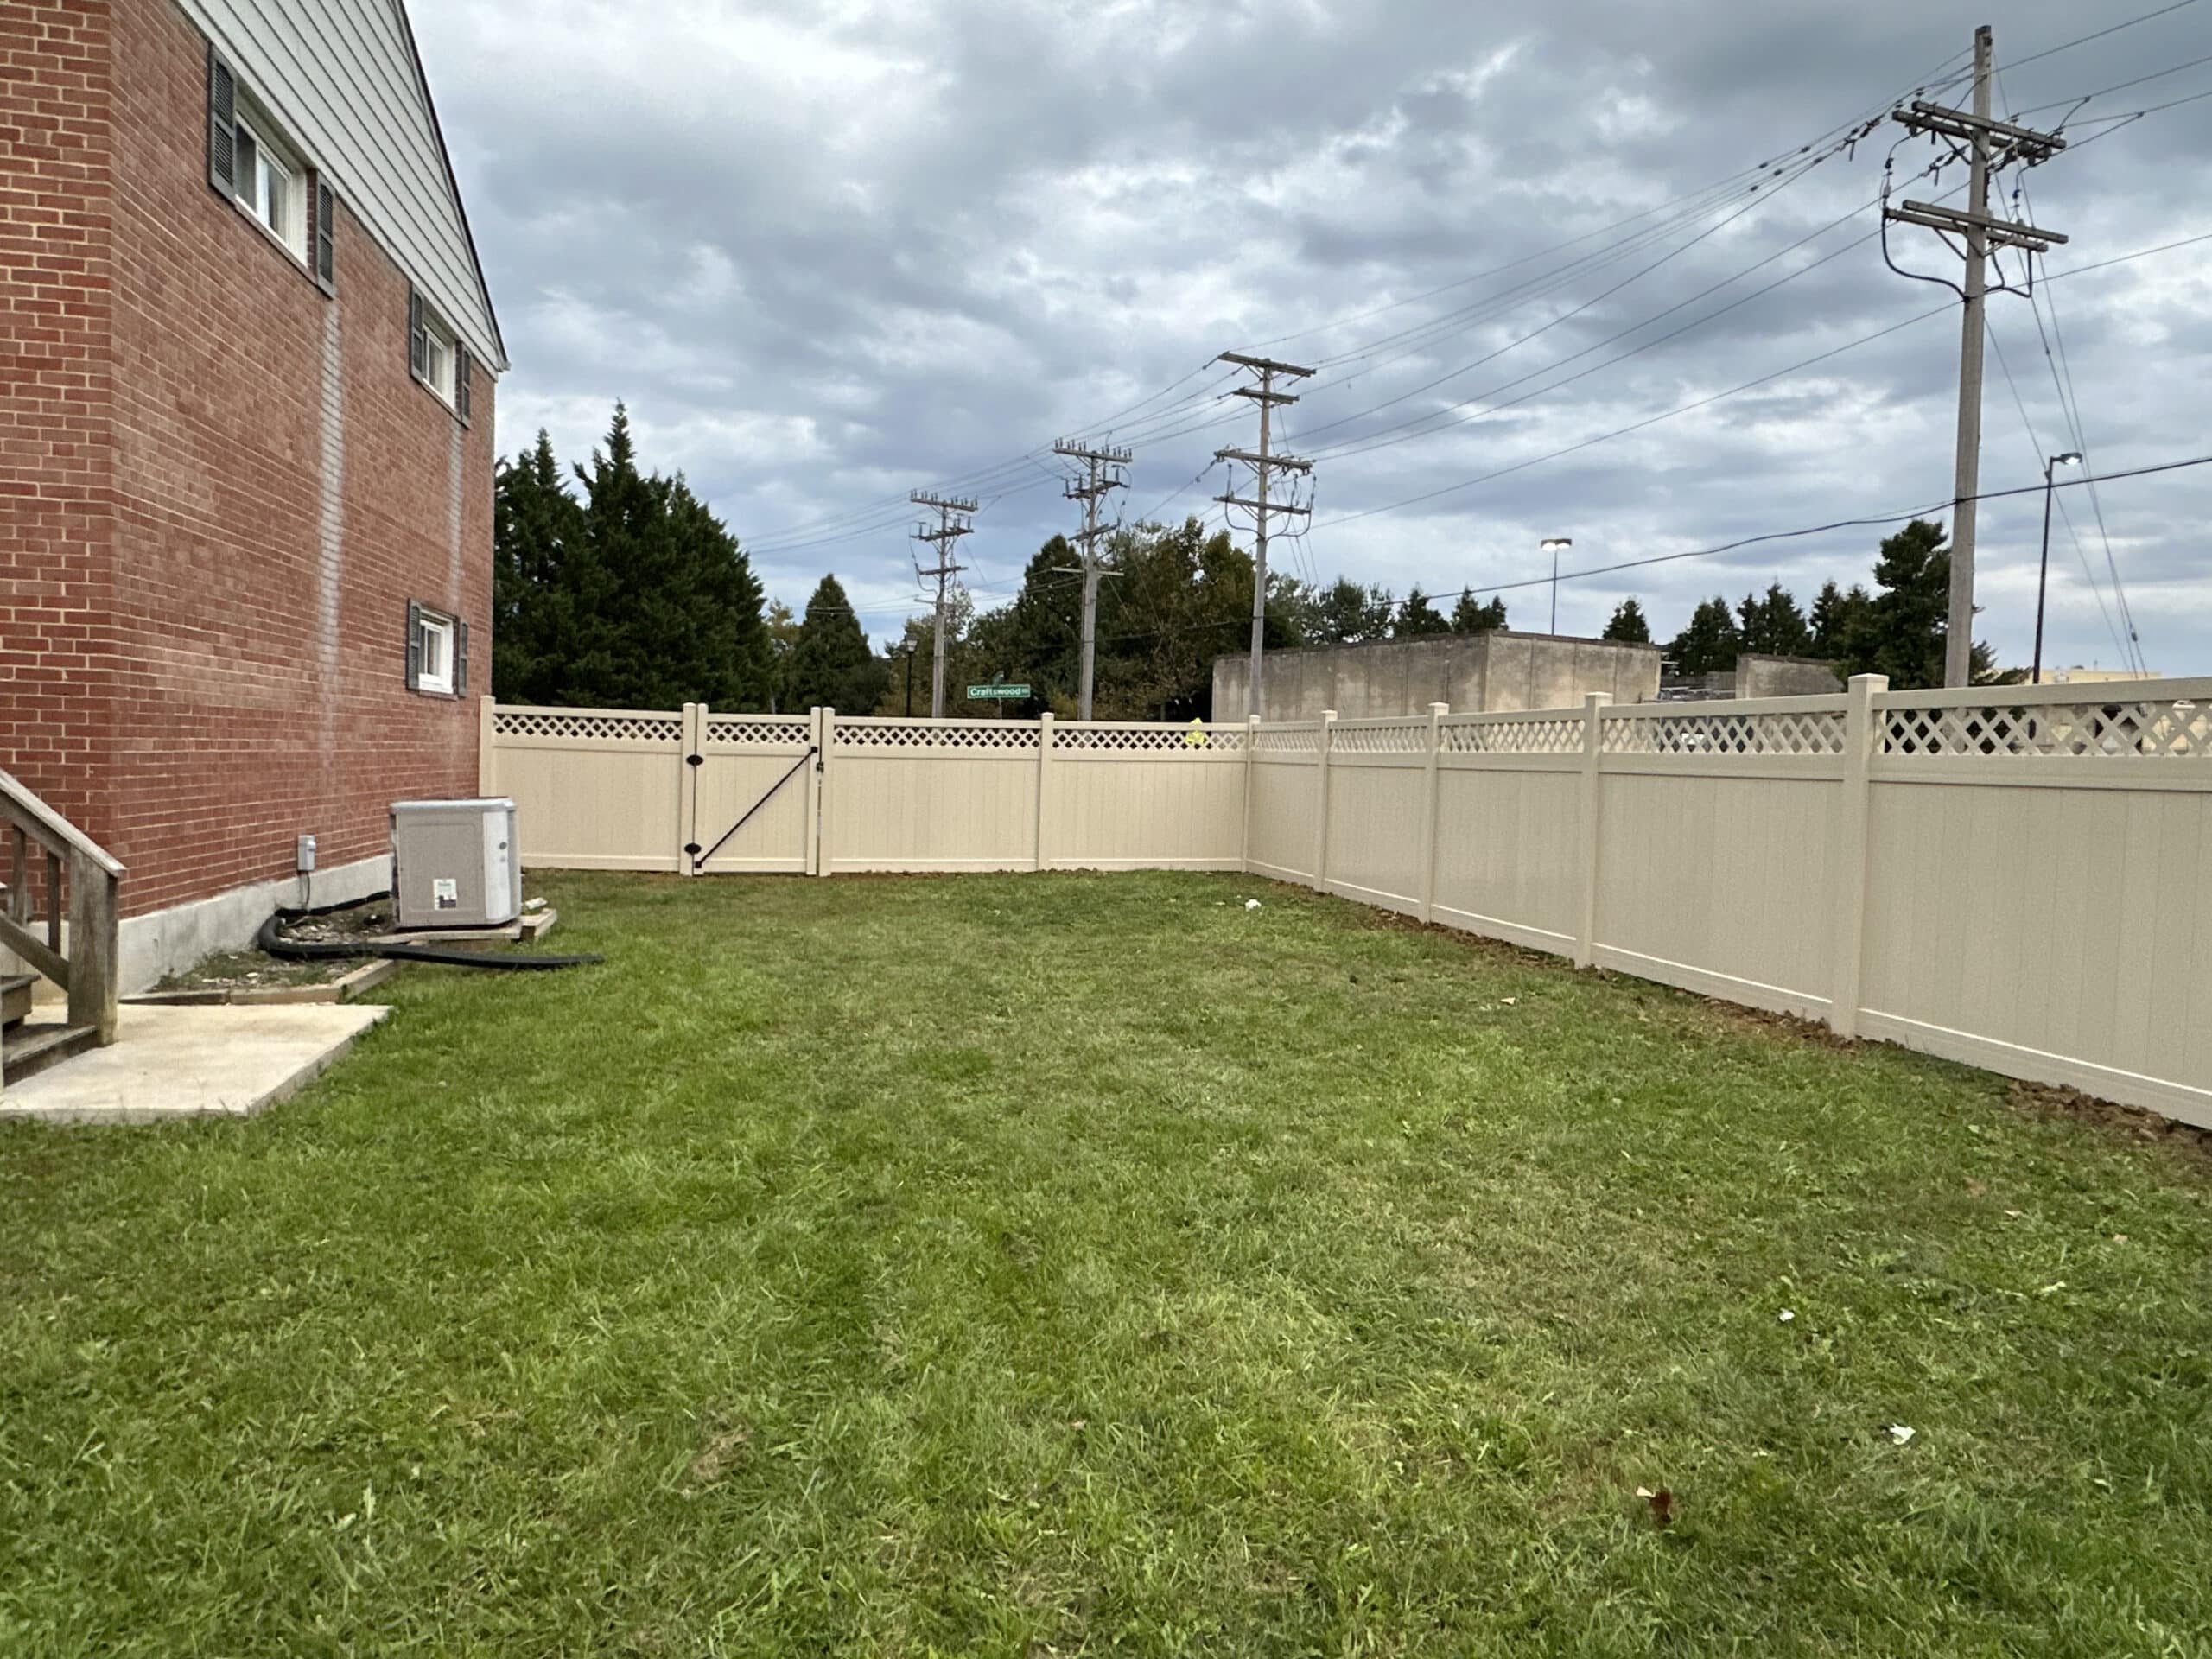 Privacy-focused tan vinyl fence lining a residential backyard with lush green grass and mature trees, in the late afternoon light, reflecting tranquility and neat landscaping.